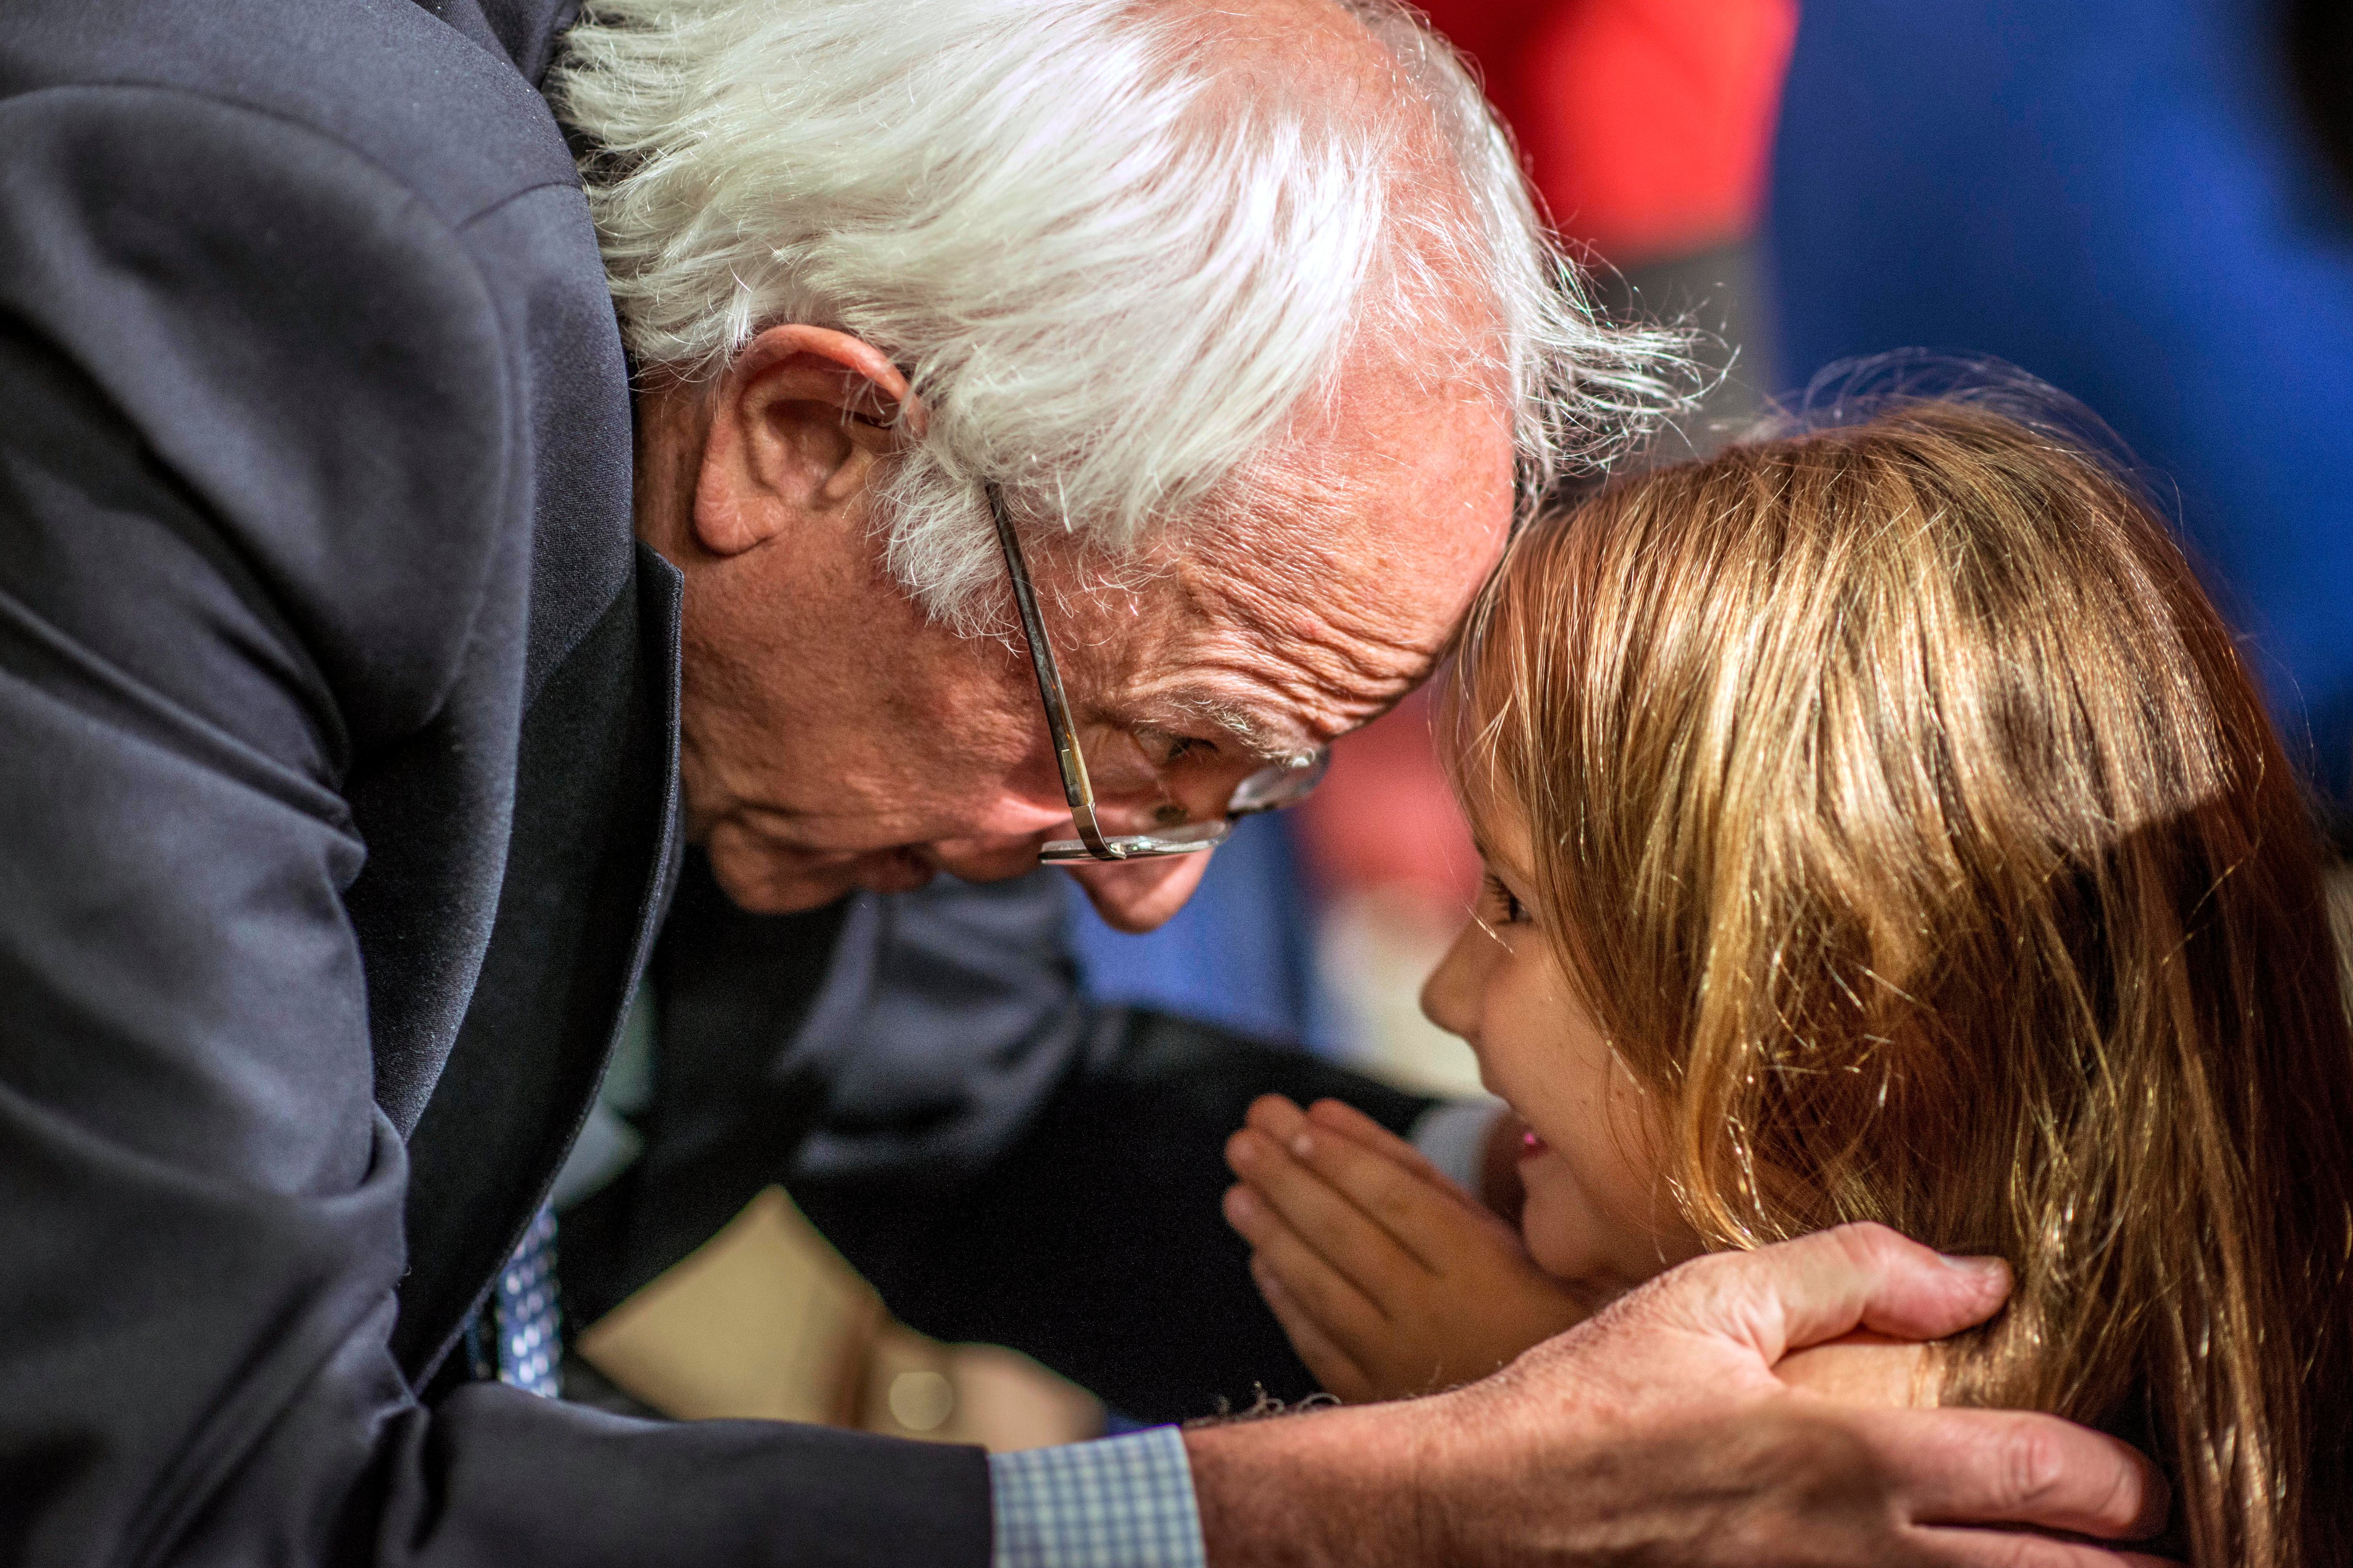 Democratic presidential candidate, Senator Bernie Sanders (I, Vt.) meets supporters after a town-hall meeting in Florence, S.C., on Sept. 12, 2015 (Melina Mara—The Washington Post/Getty Images)